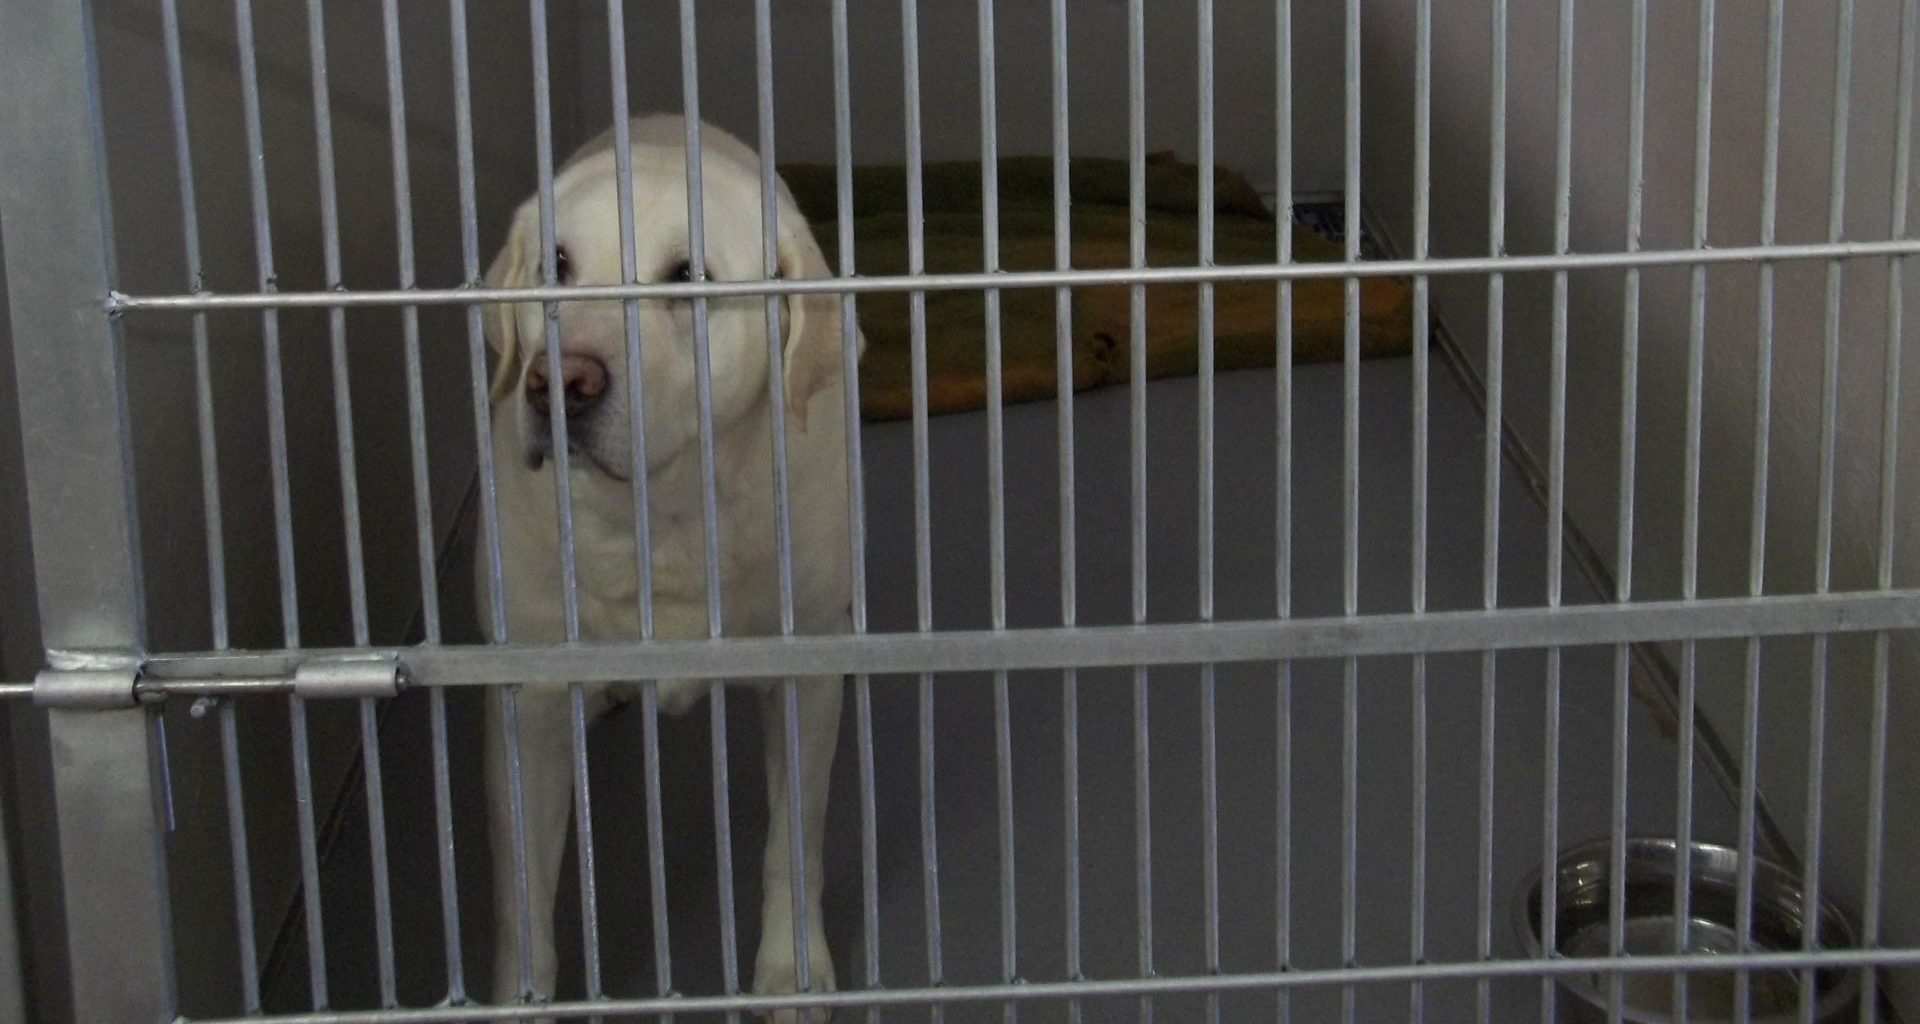 white dog standing in kennel